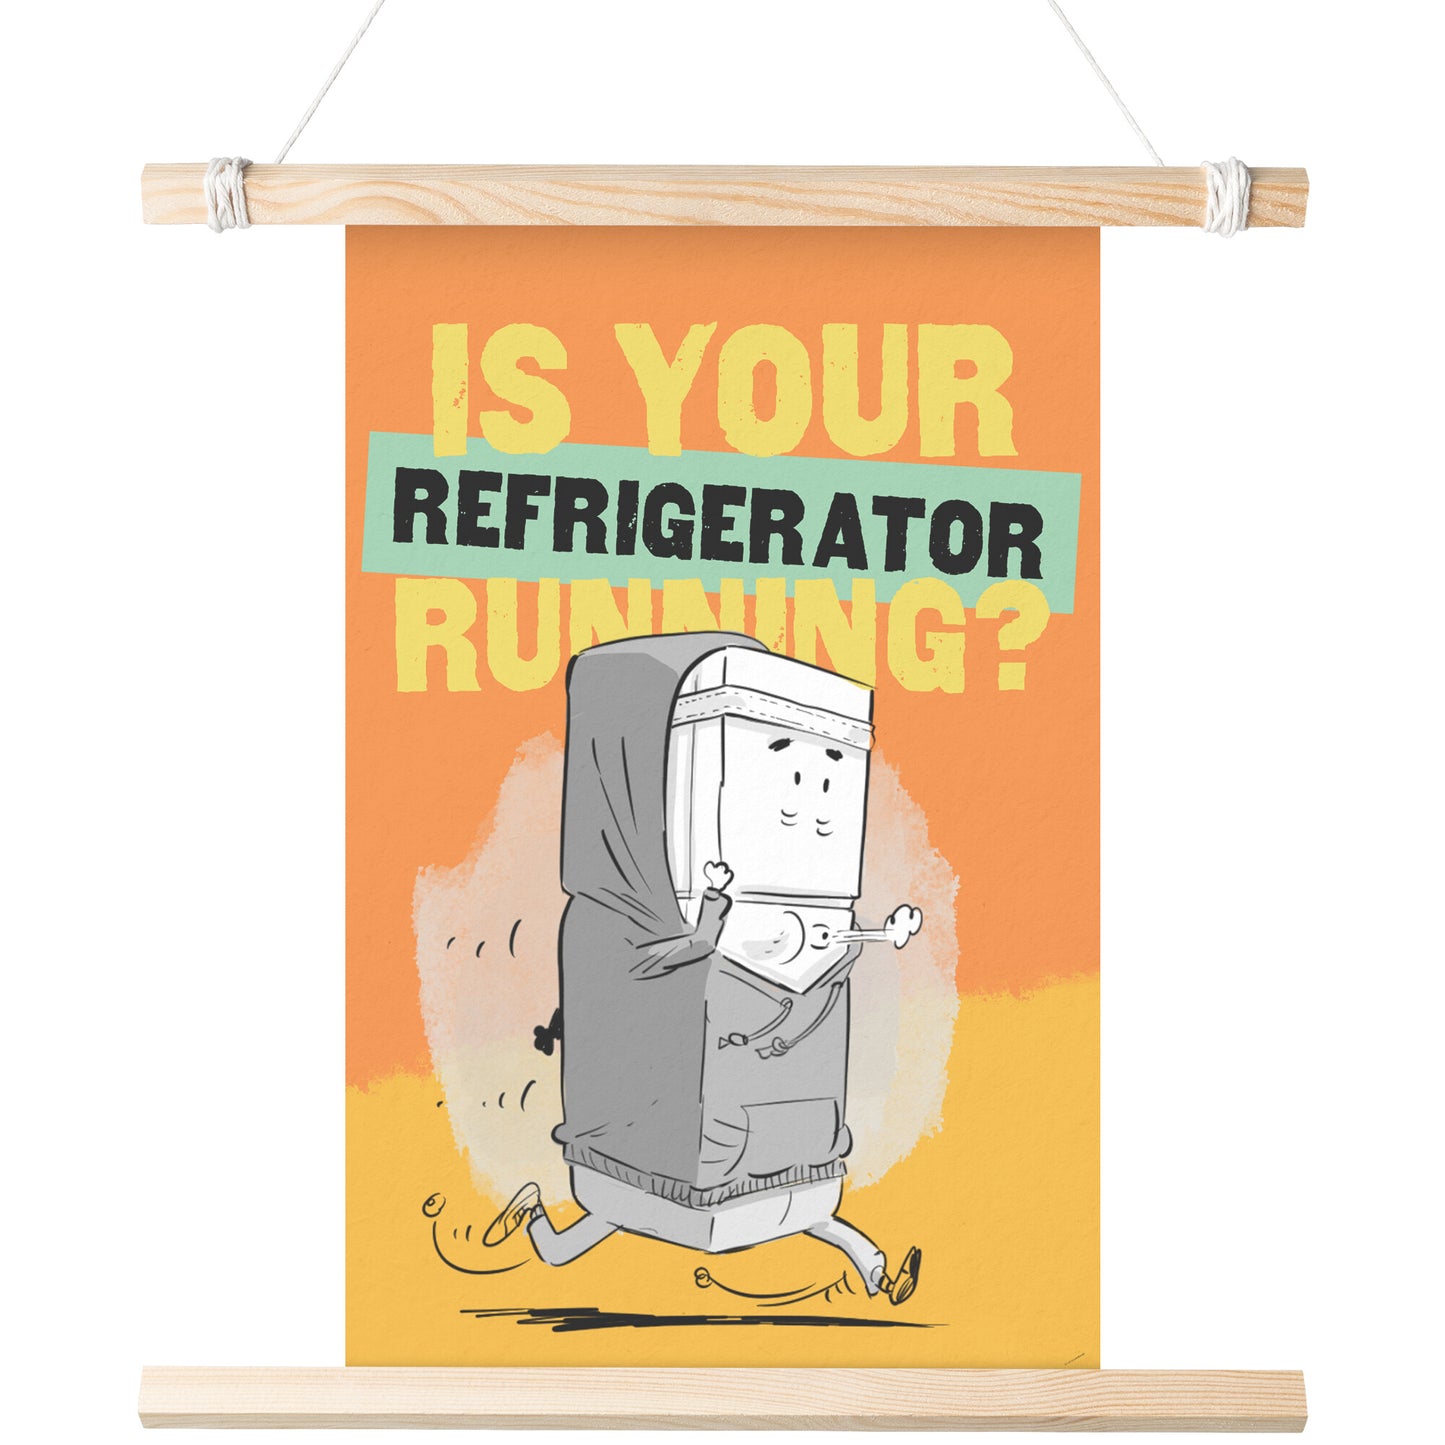 Is your Refrigerator Running? 11x17 Poster